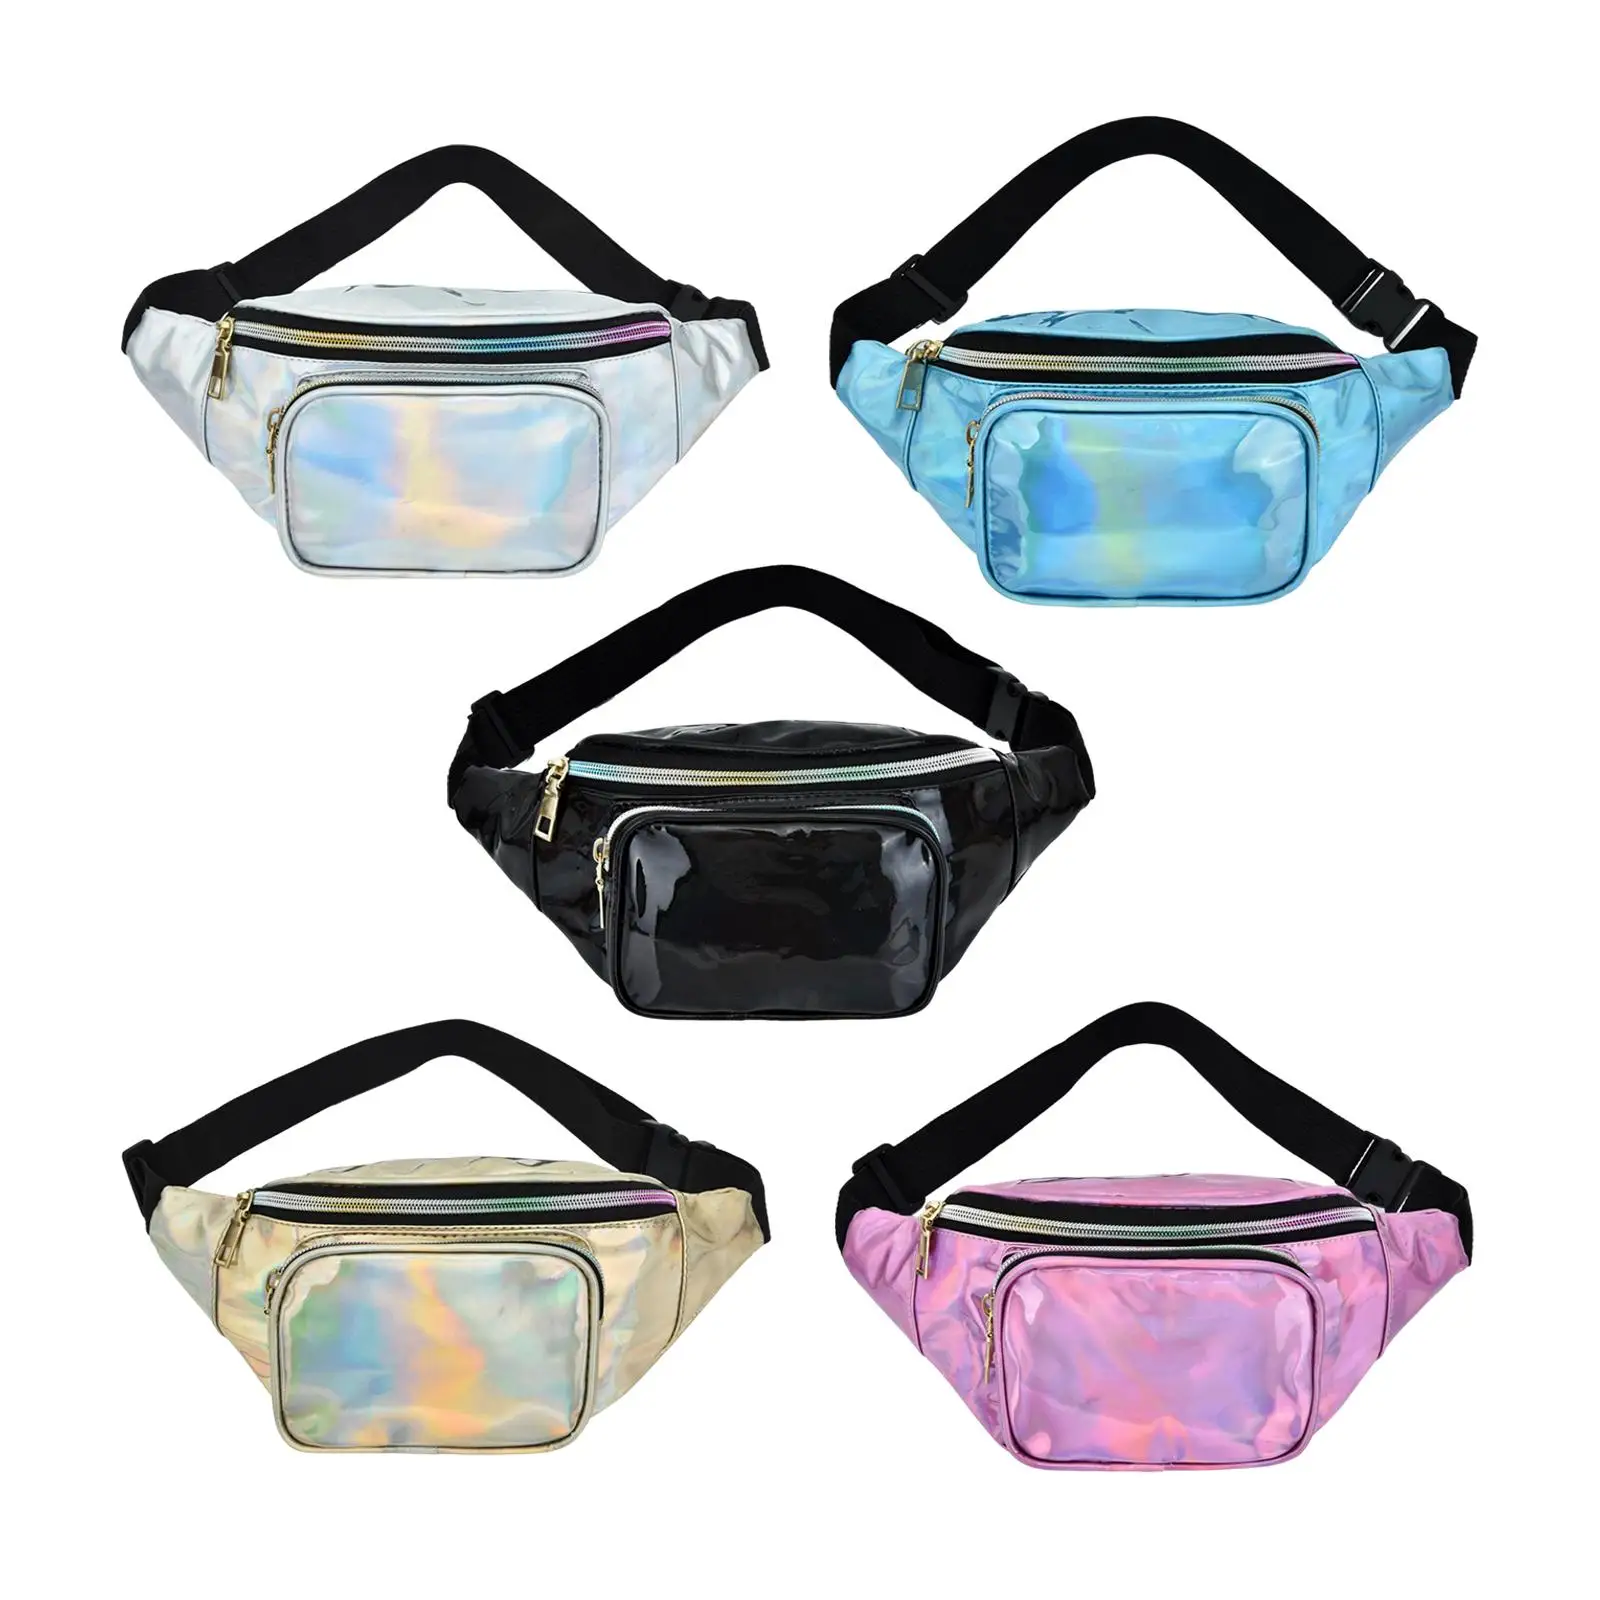 Waist Bag Chest Pocket Holographic Easy Carry Water Resistant for Travelling Hiking Phone